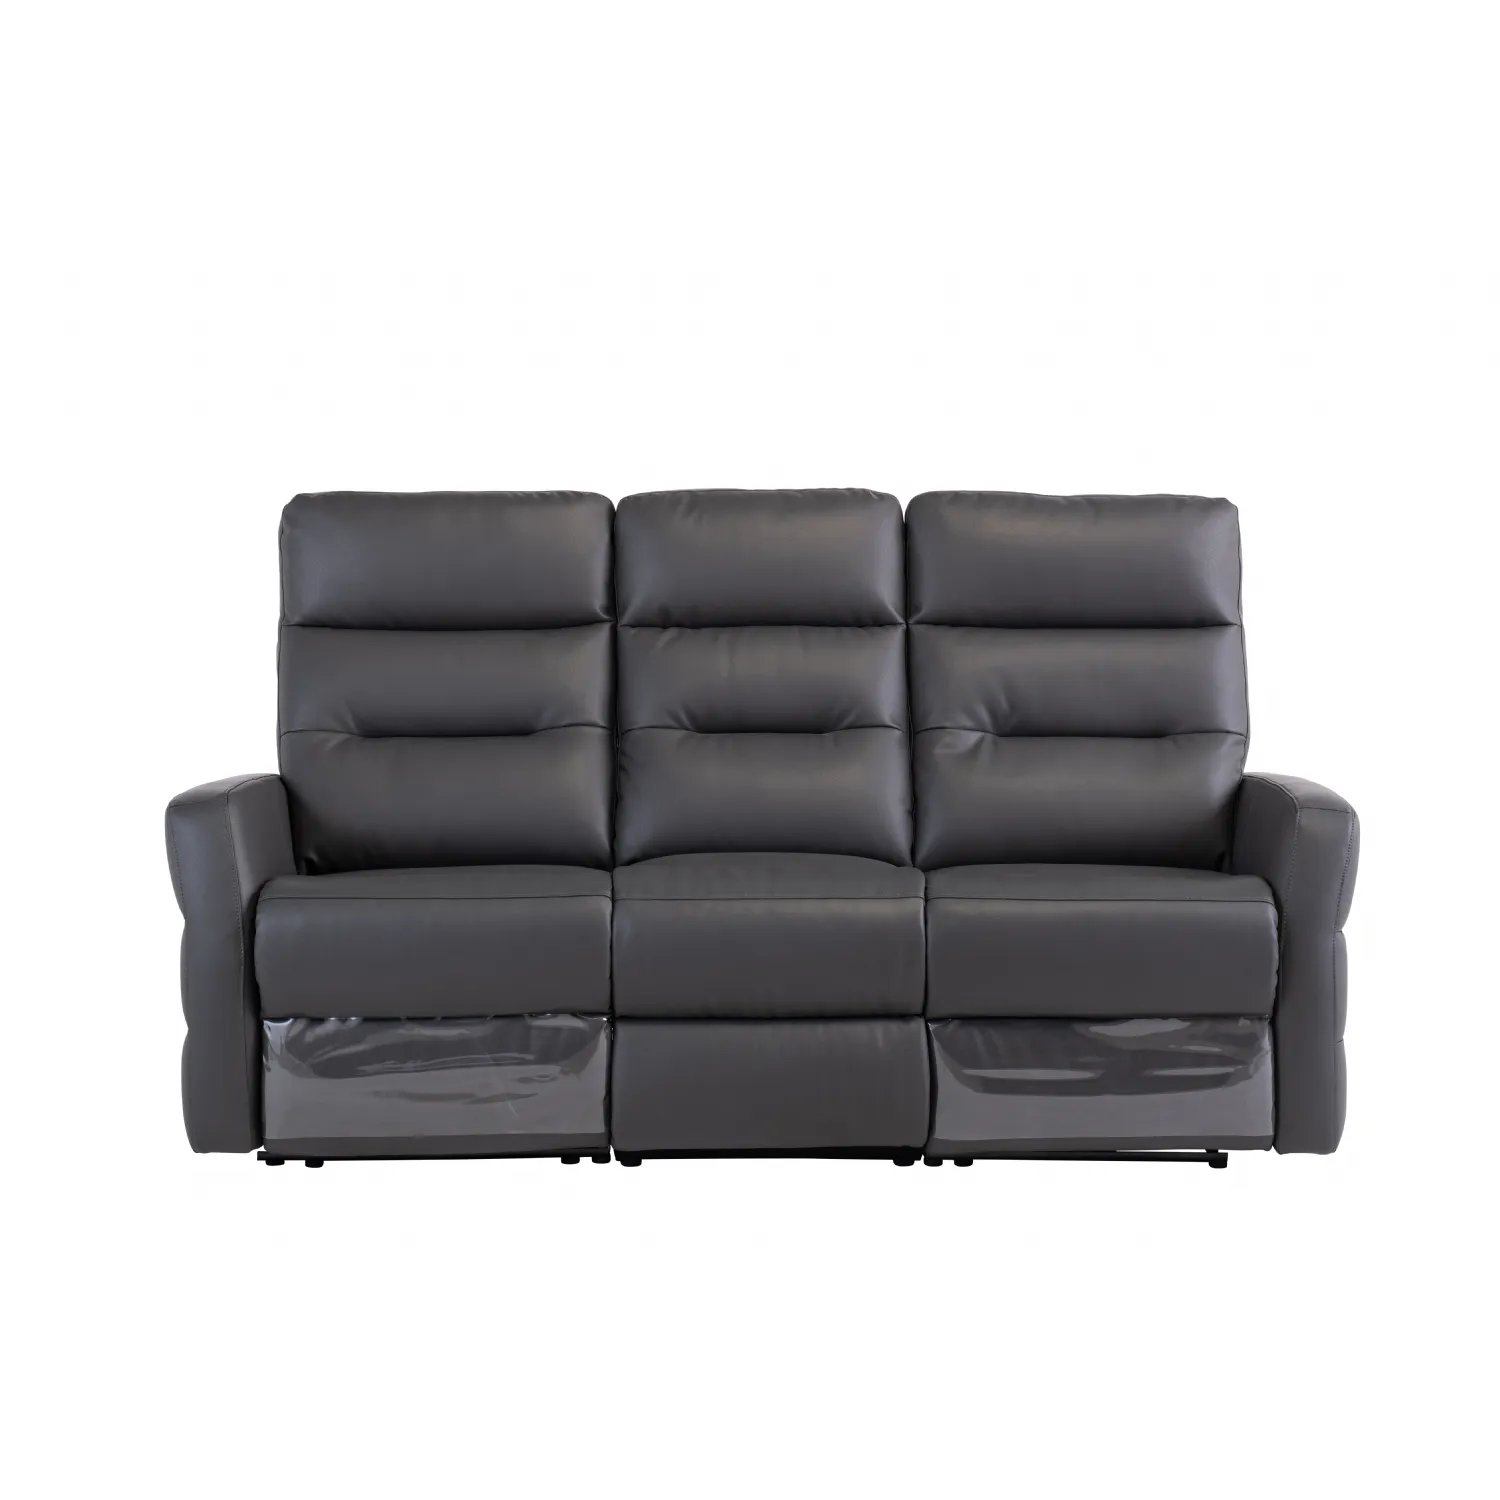 Charcoal Grey Leather Electric Recliner 3 Seat Sofa